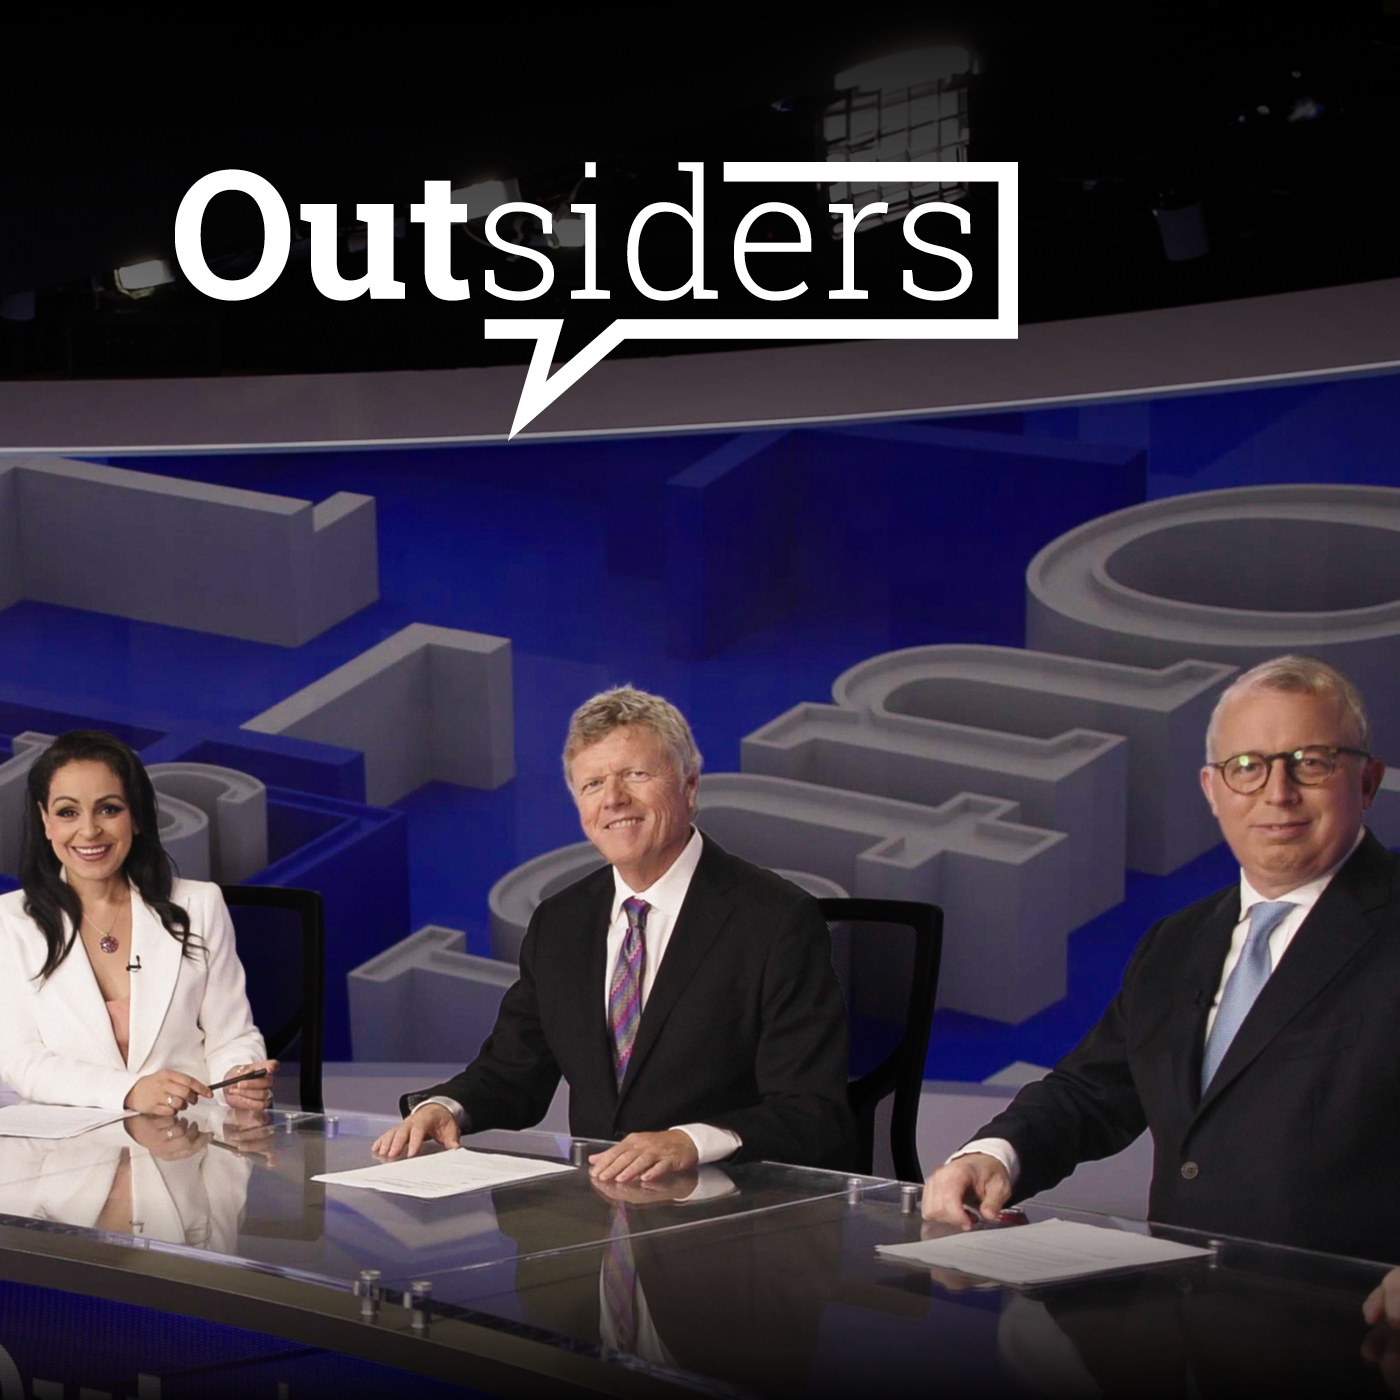 Outsiders, Sunday 6th December